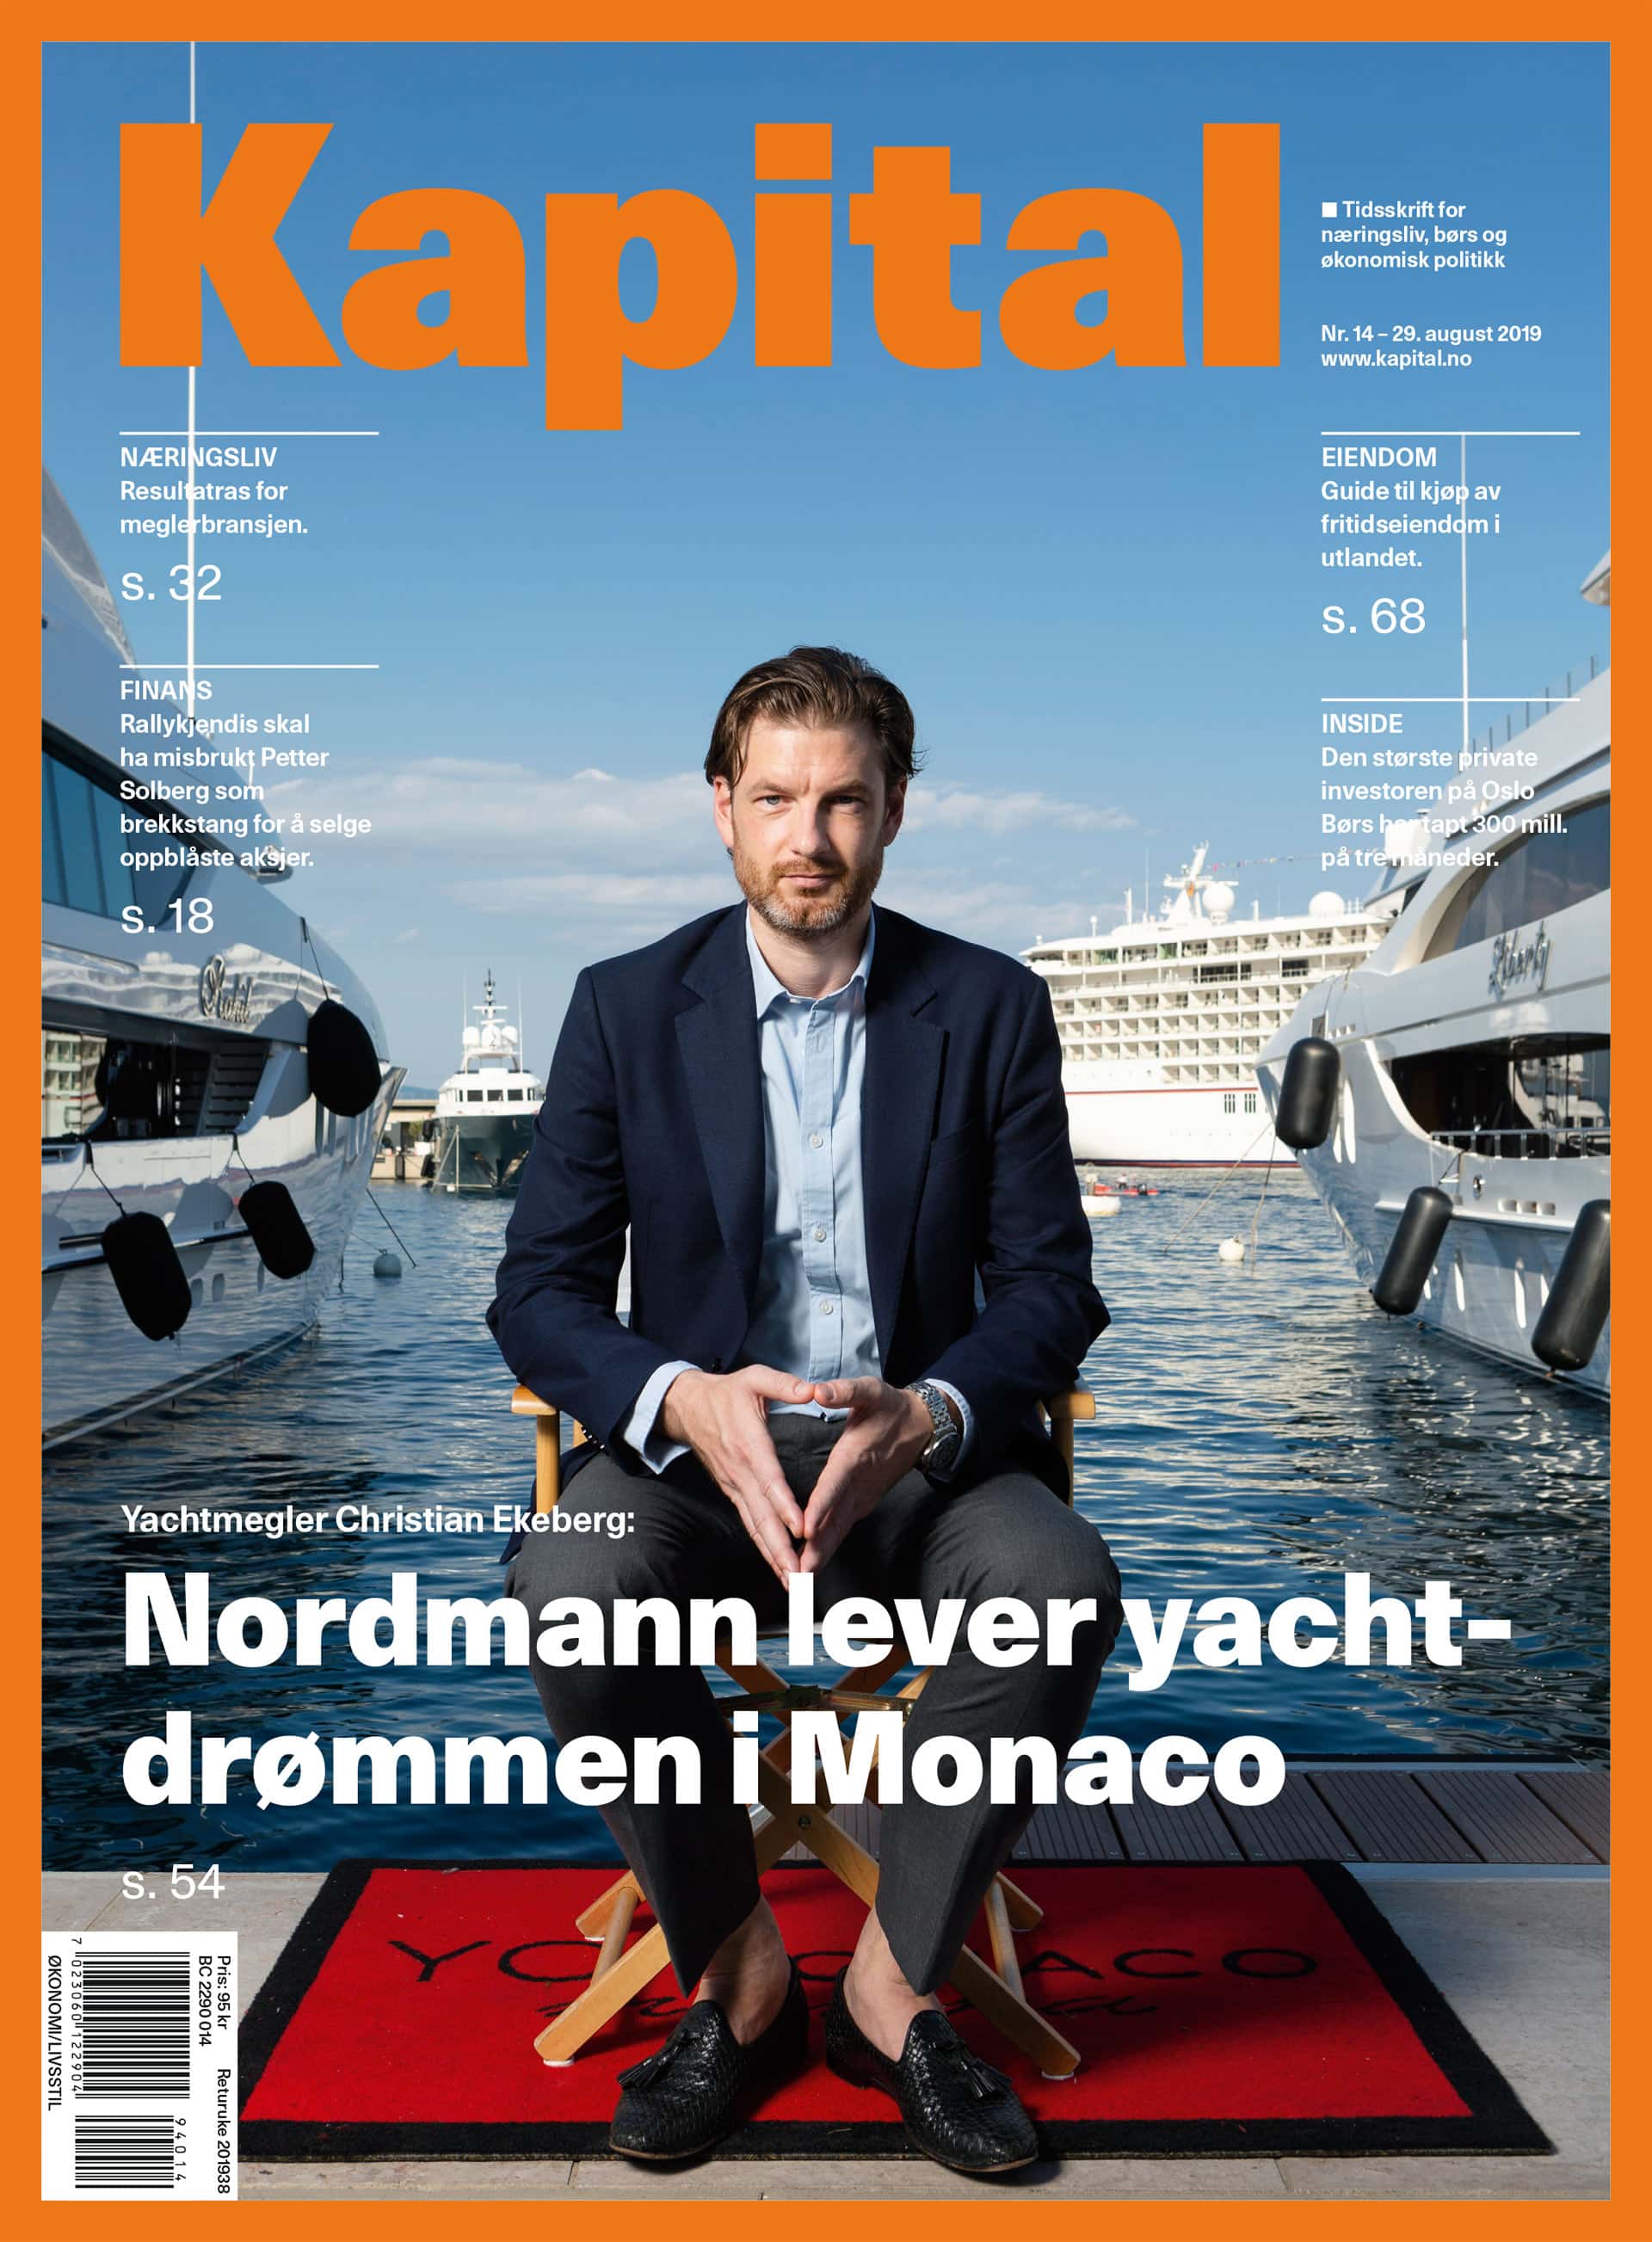 Magazine cover showing man in suit sitting in a chair on the jetty in a port